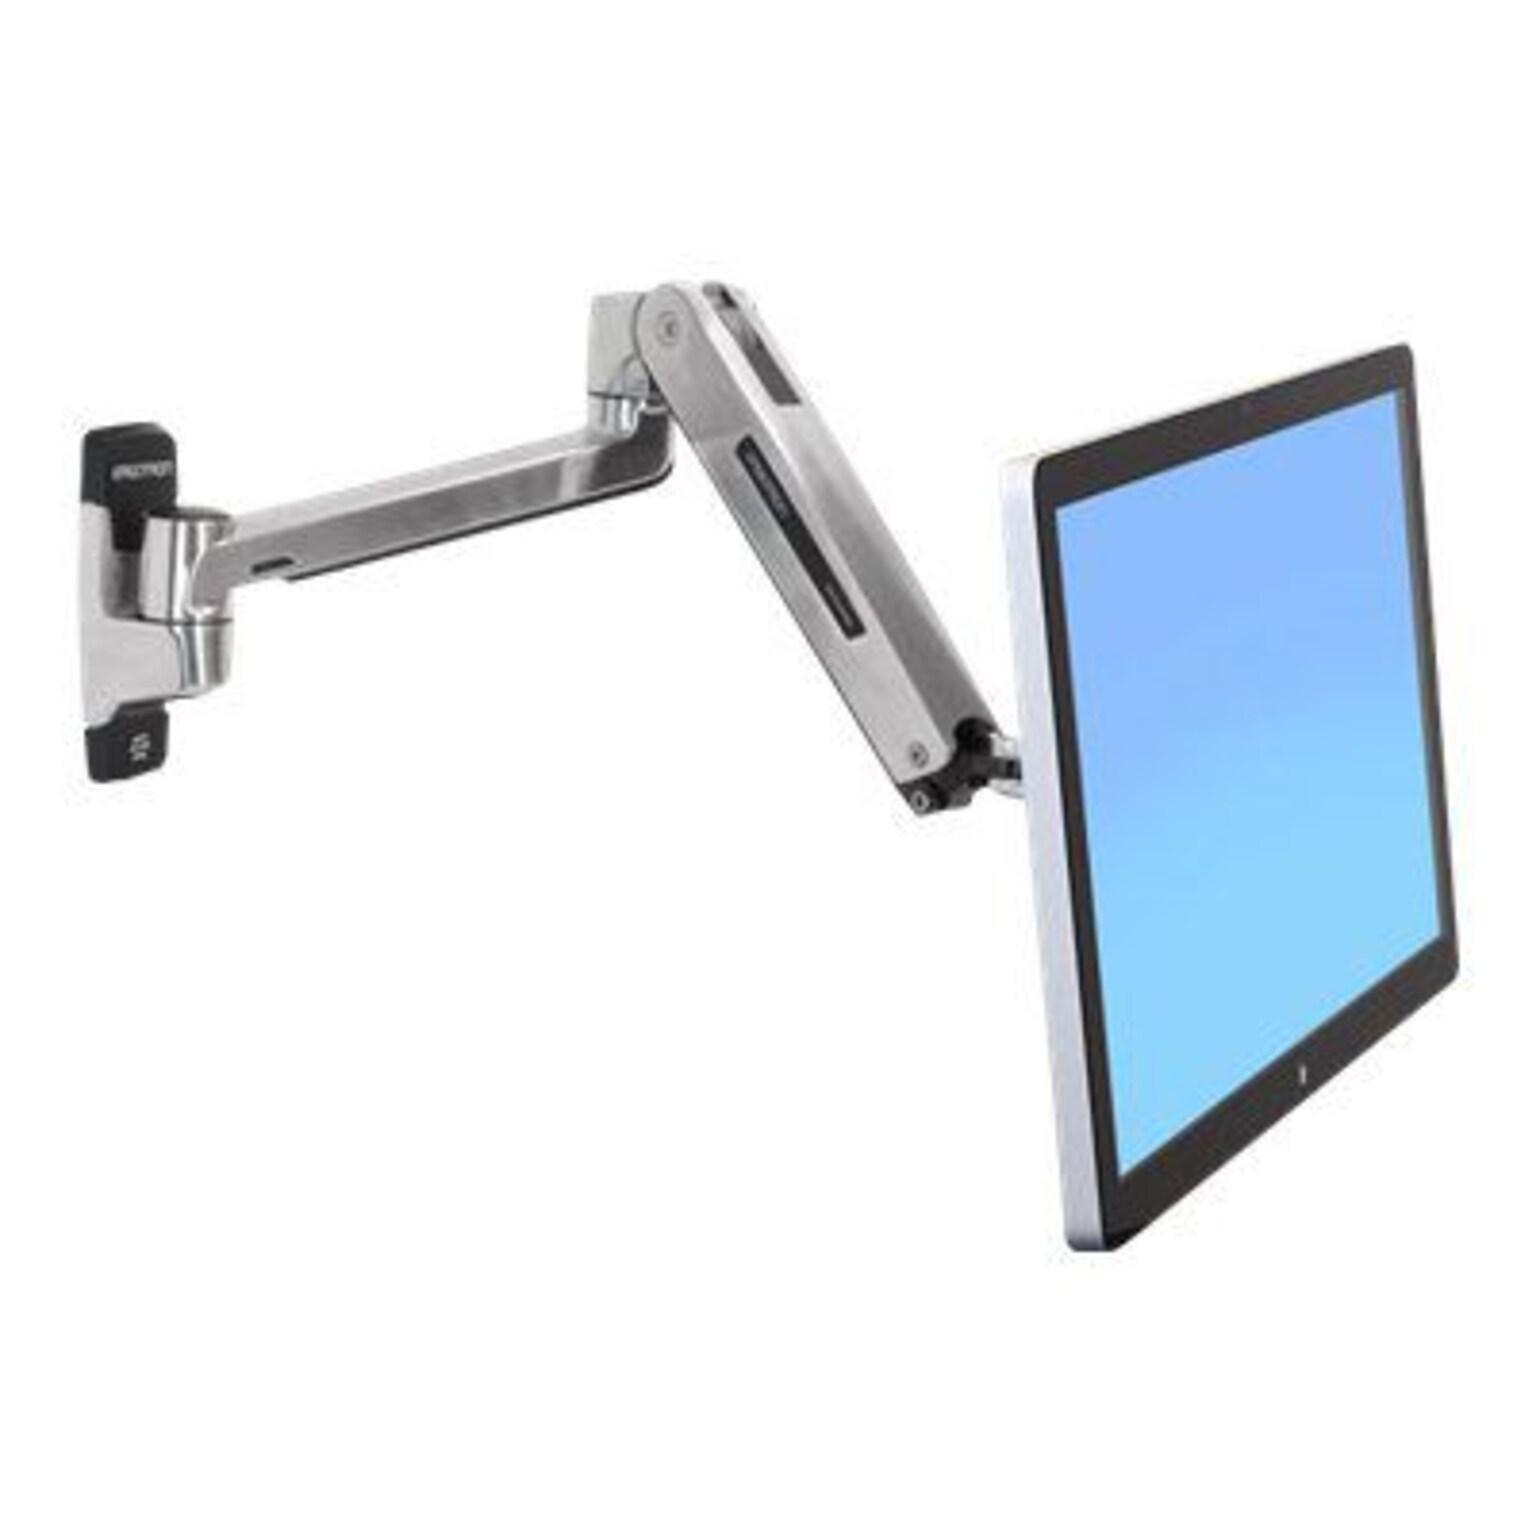 Ergotron LX HD Sit-Stand Wall Arm Adjustable Monitor, Up to 46, Polished Aluminum (45-383-026)